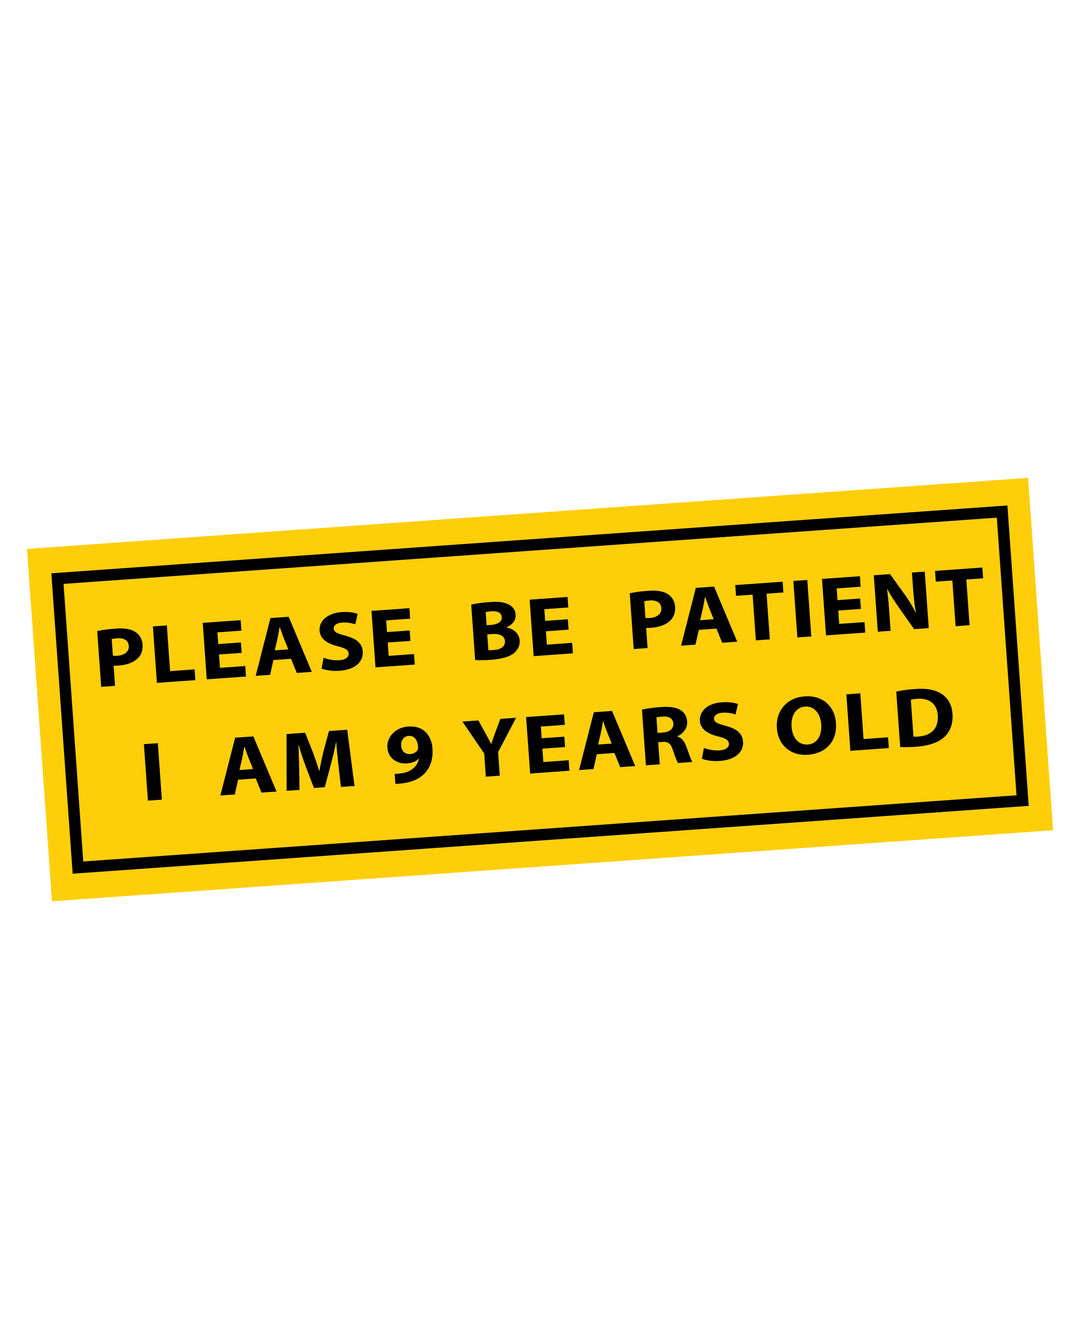 Please Be Patient, I am 9 Years Old bumper sticker